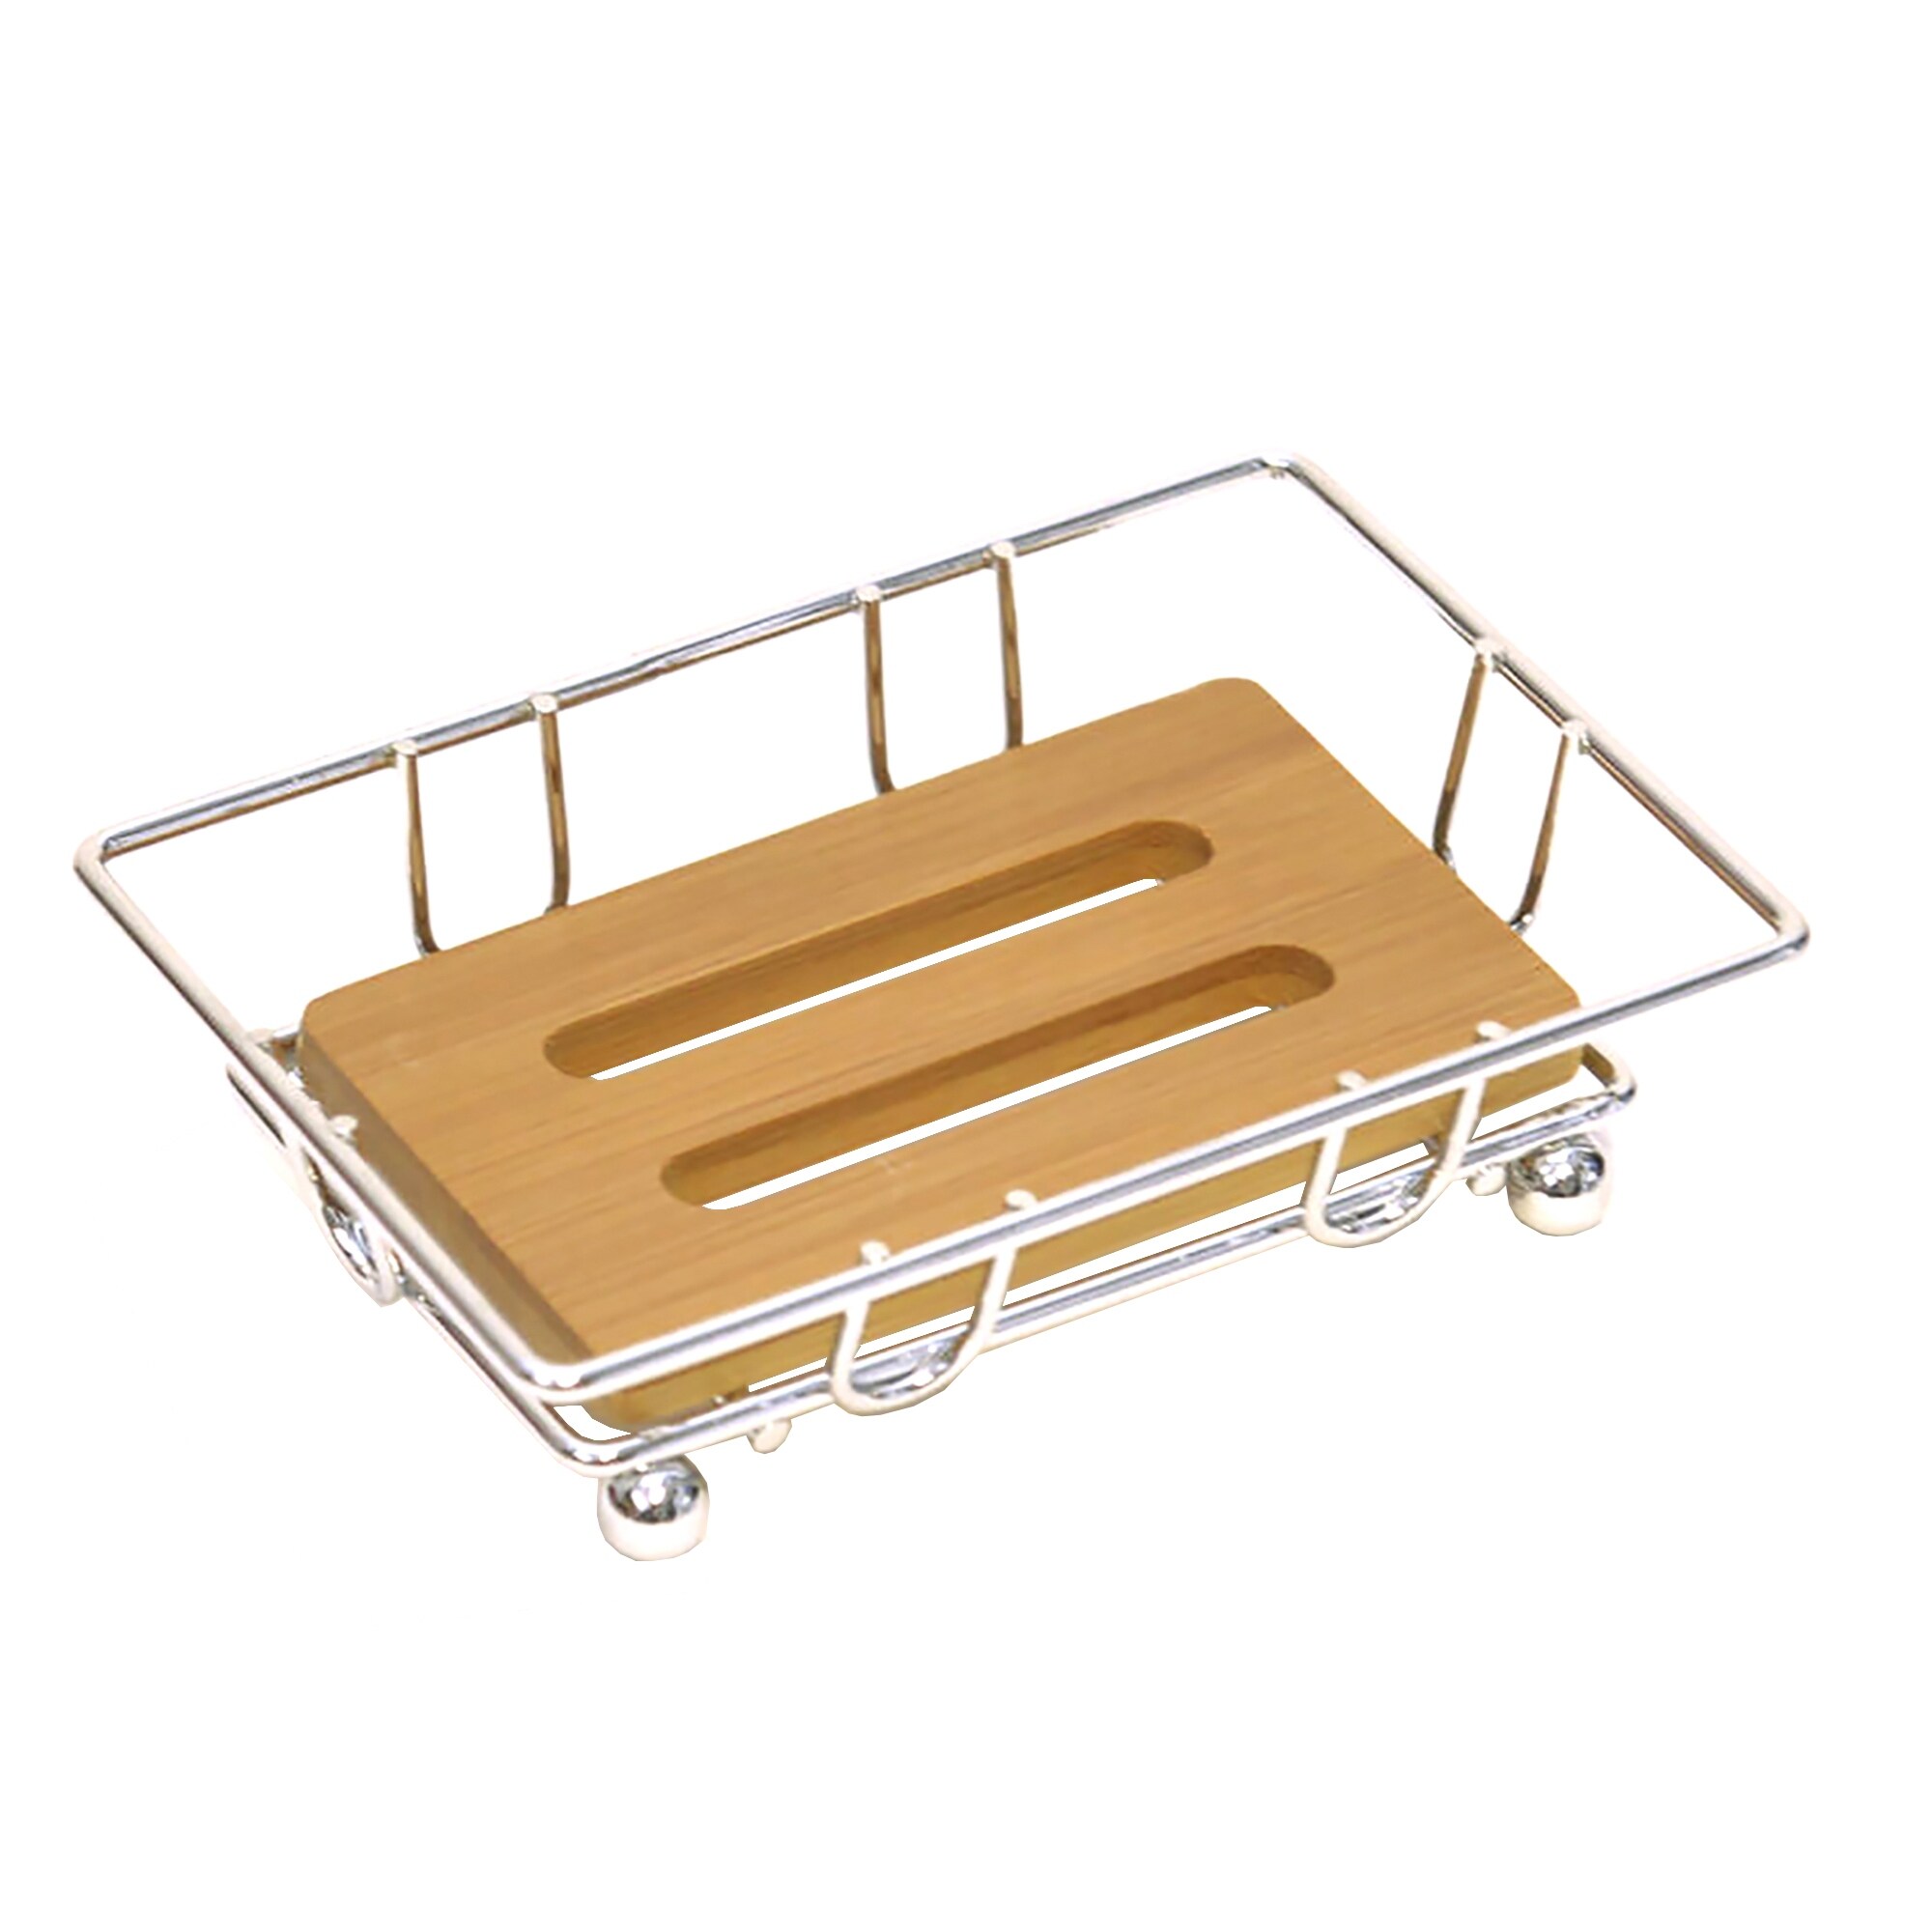 https://ak1.ostkcdn.com/images/products/is/images/direct/7bb70847e9d665044fa5fc3ae4c2fb01d5edcf88/Evideco-Bathroom-Metal-Wire-Soap-Dish-Cup-with-Bamboo-Tray-Brown.jpg